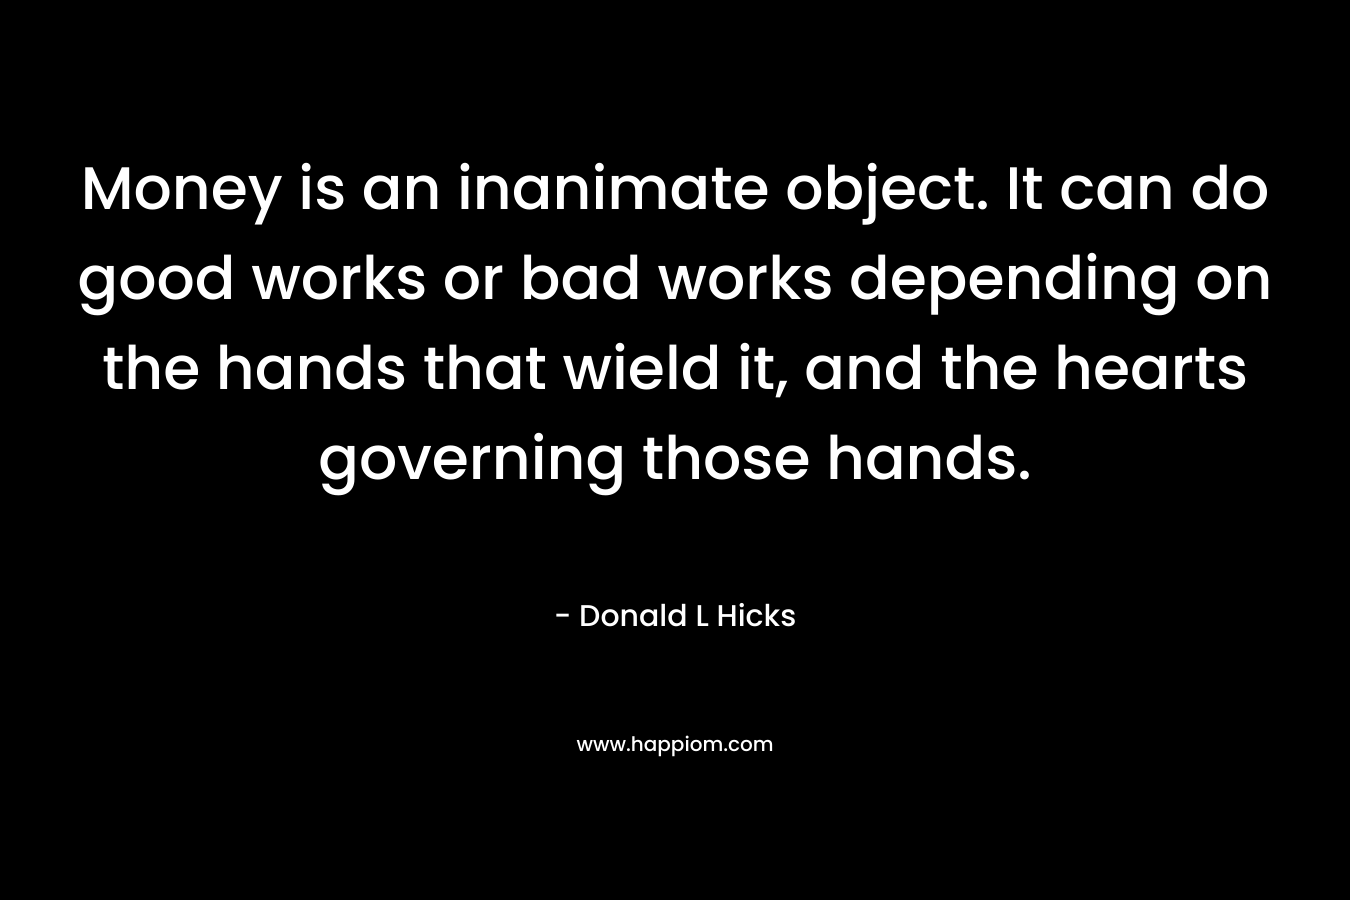 Money is an inanimate object. It can do good works or bad works depending on the hands that wield it, and the hearts governing those hands.